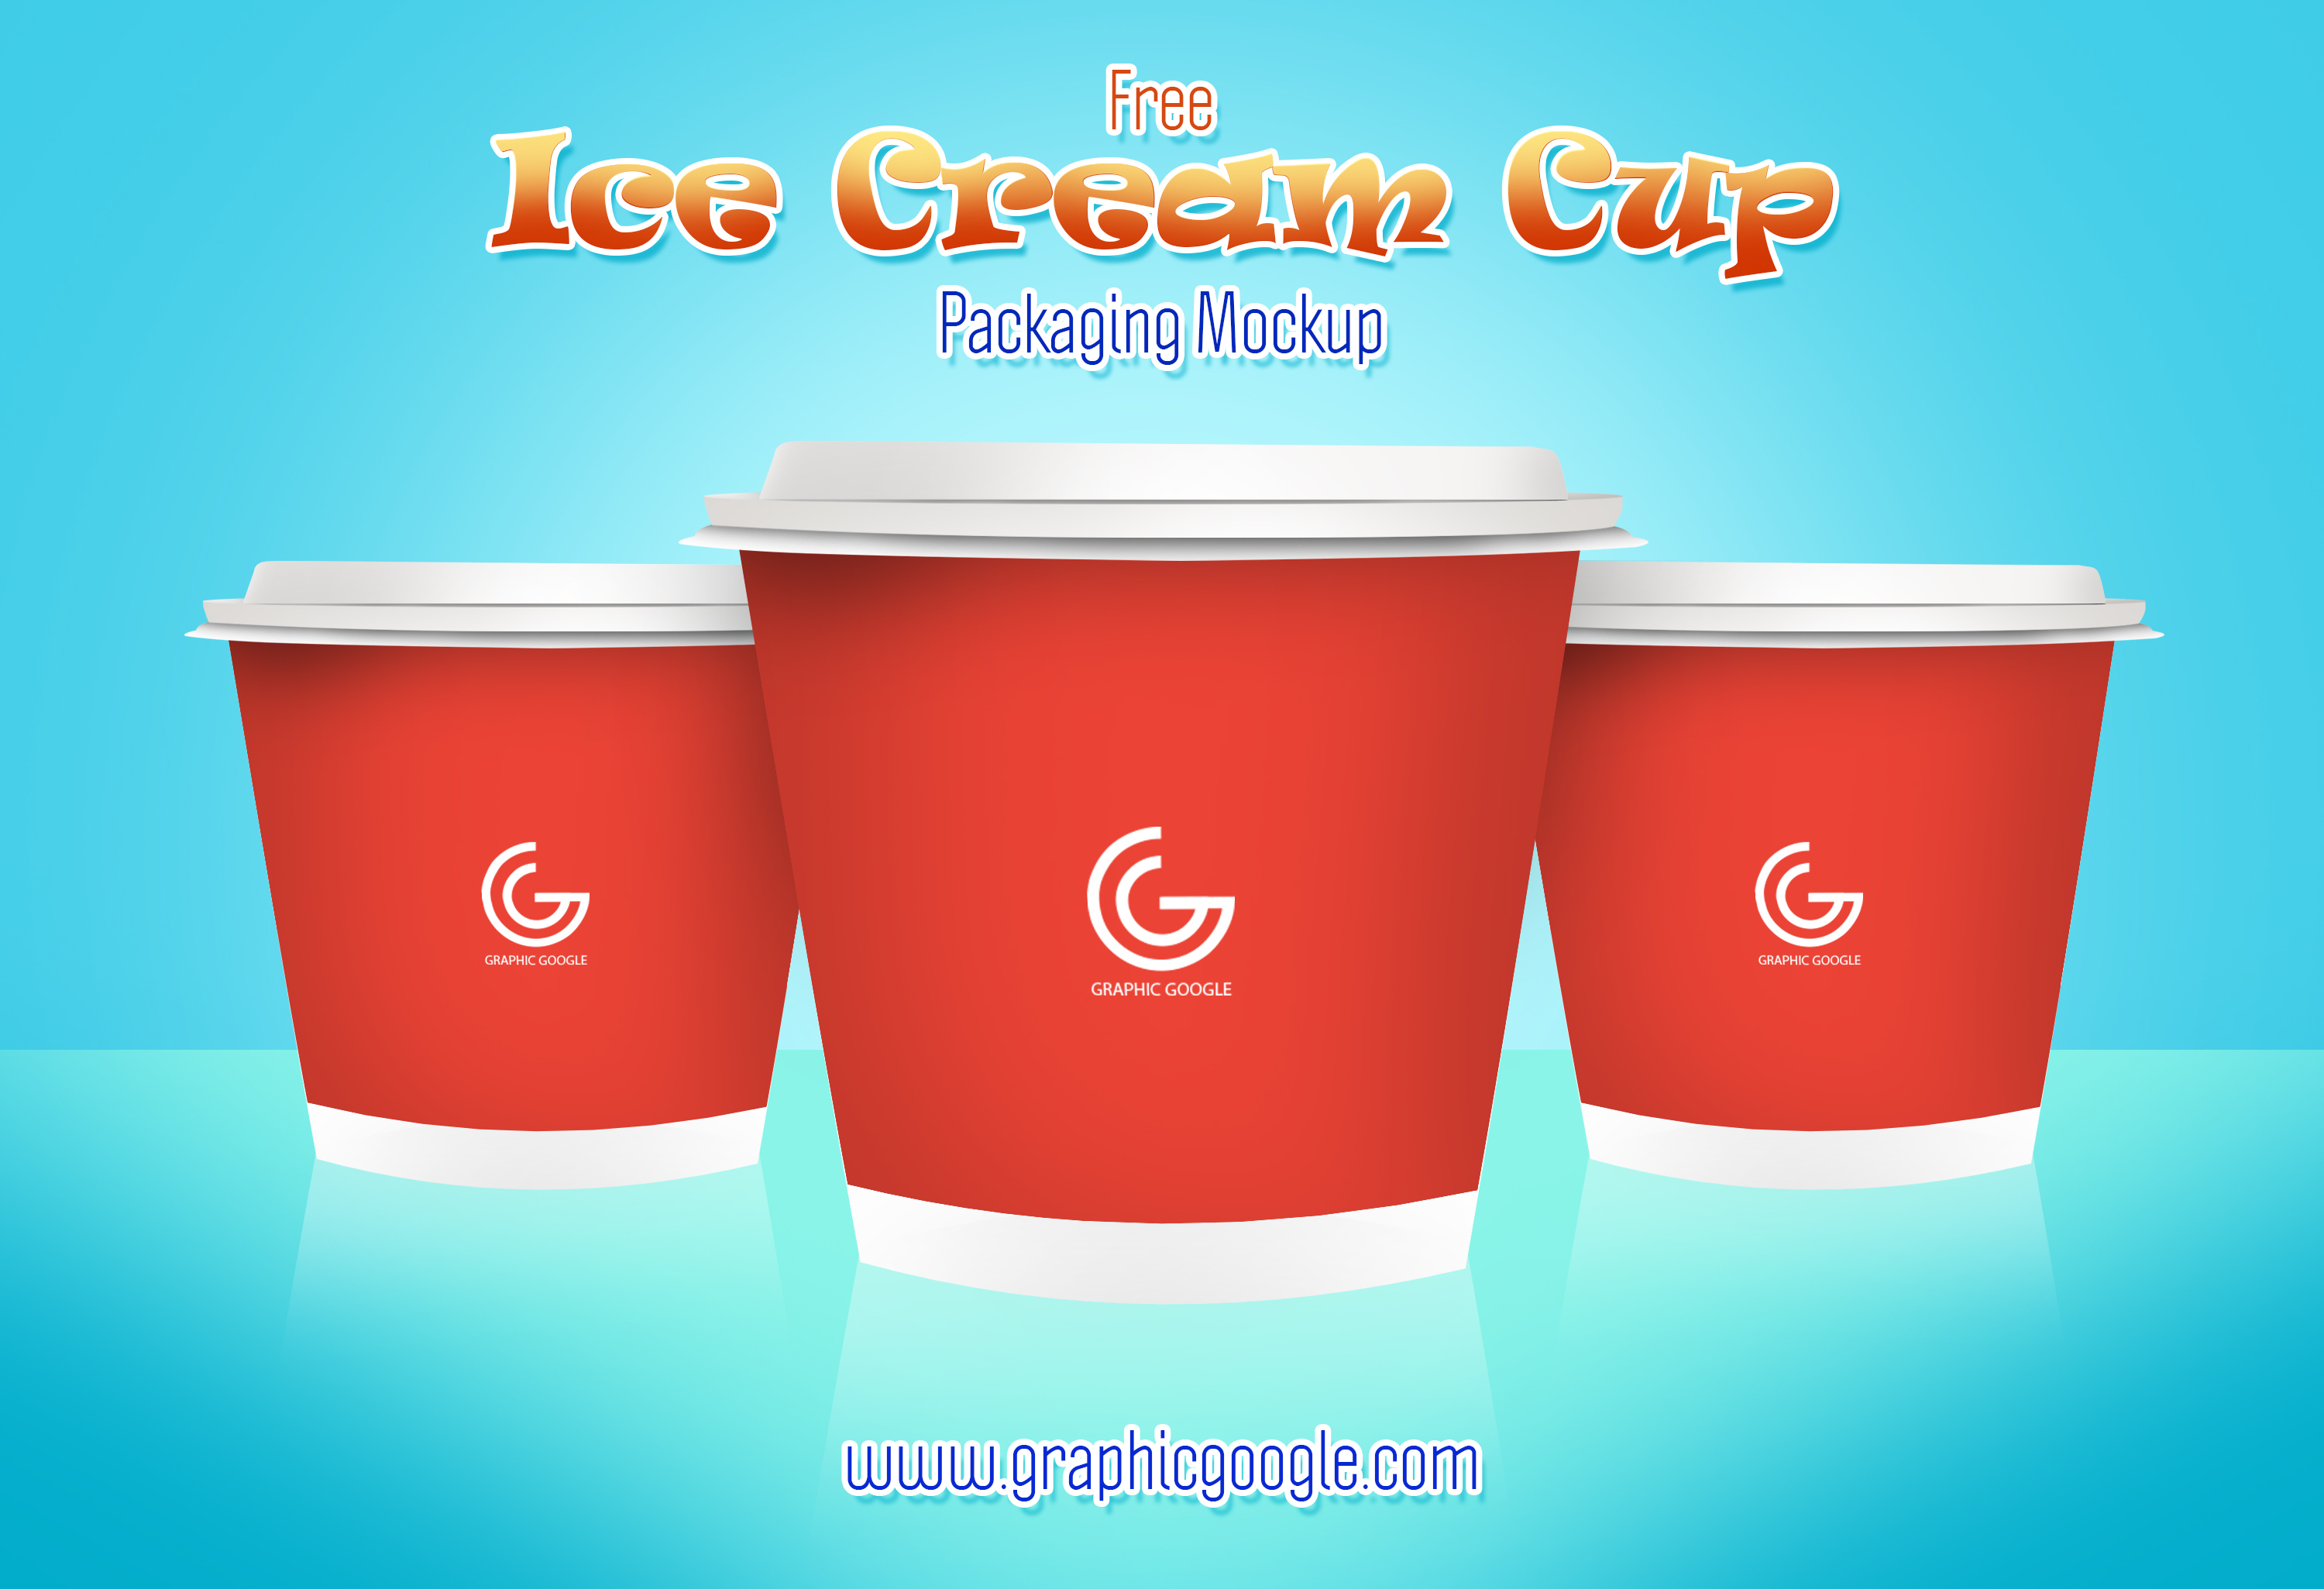 Free Ice Cream Cup Packaging Mockup-2